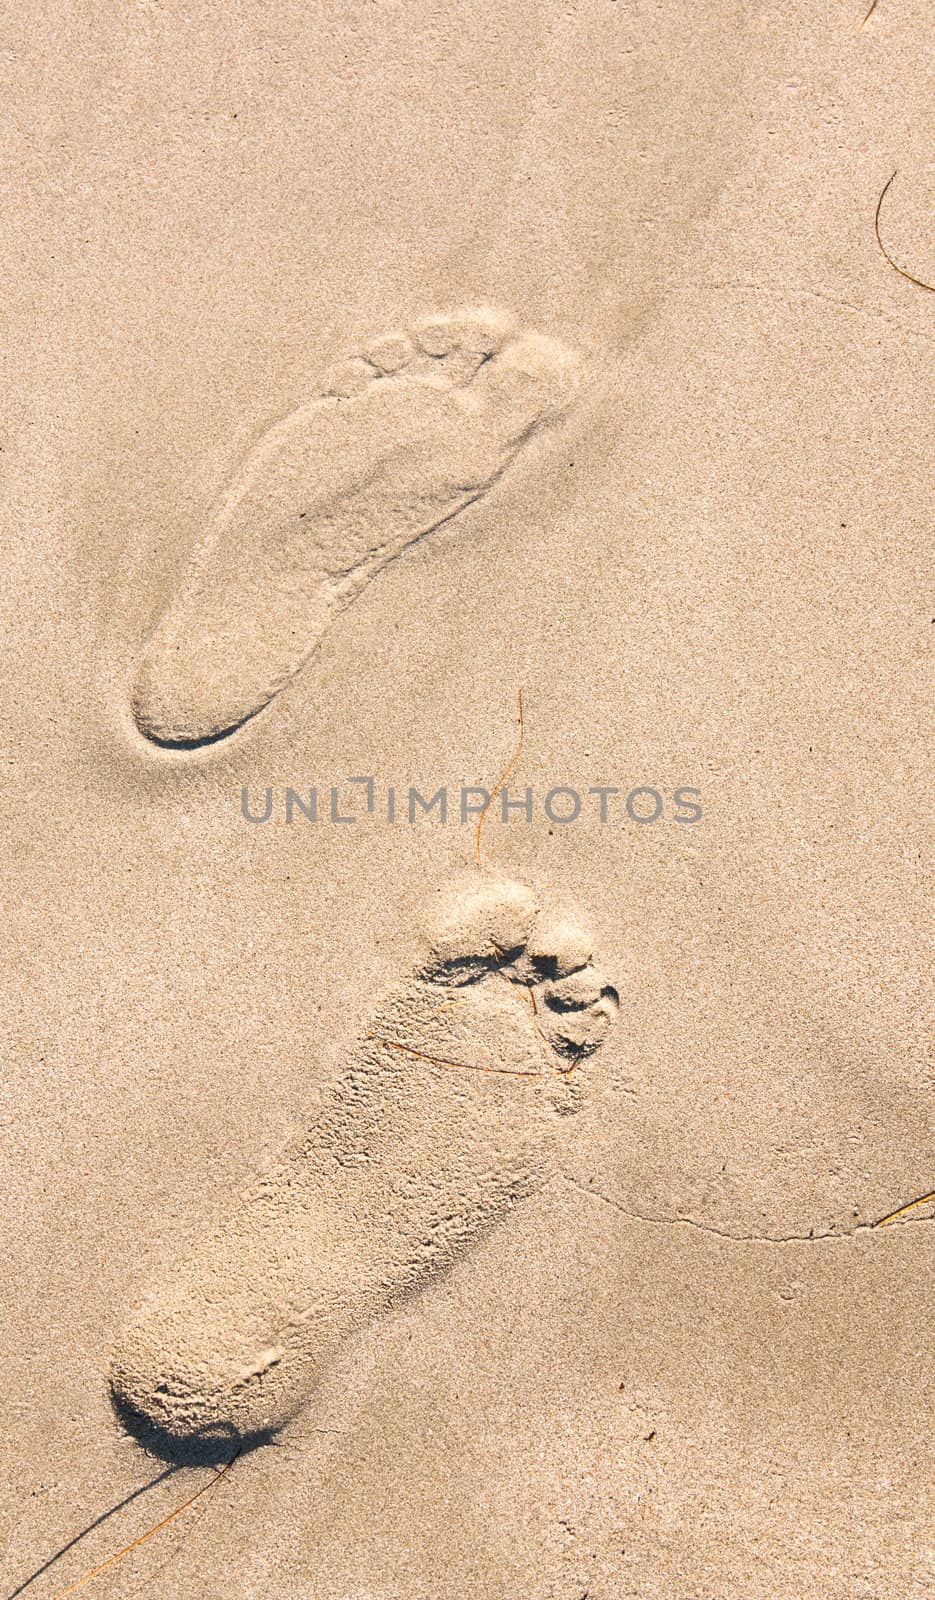 Footprints on the sands of a man.